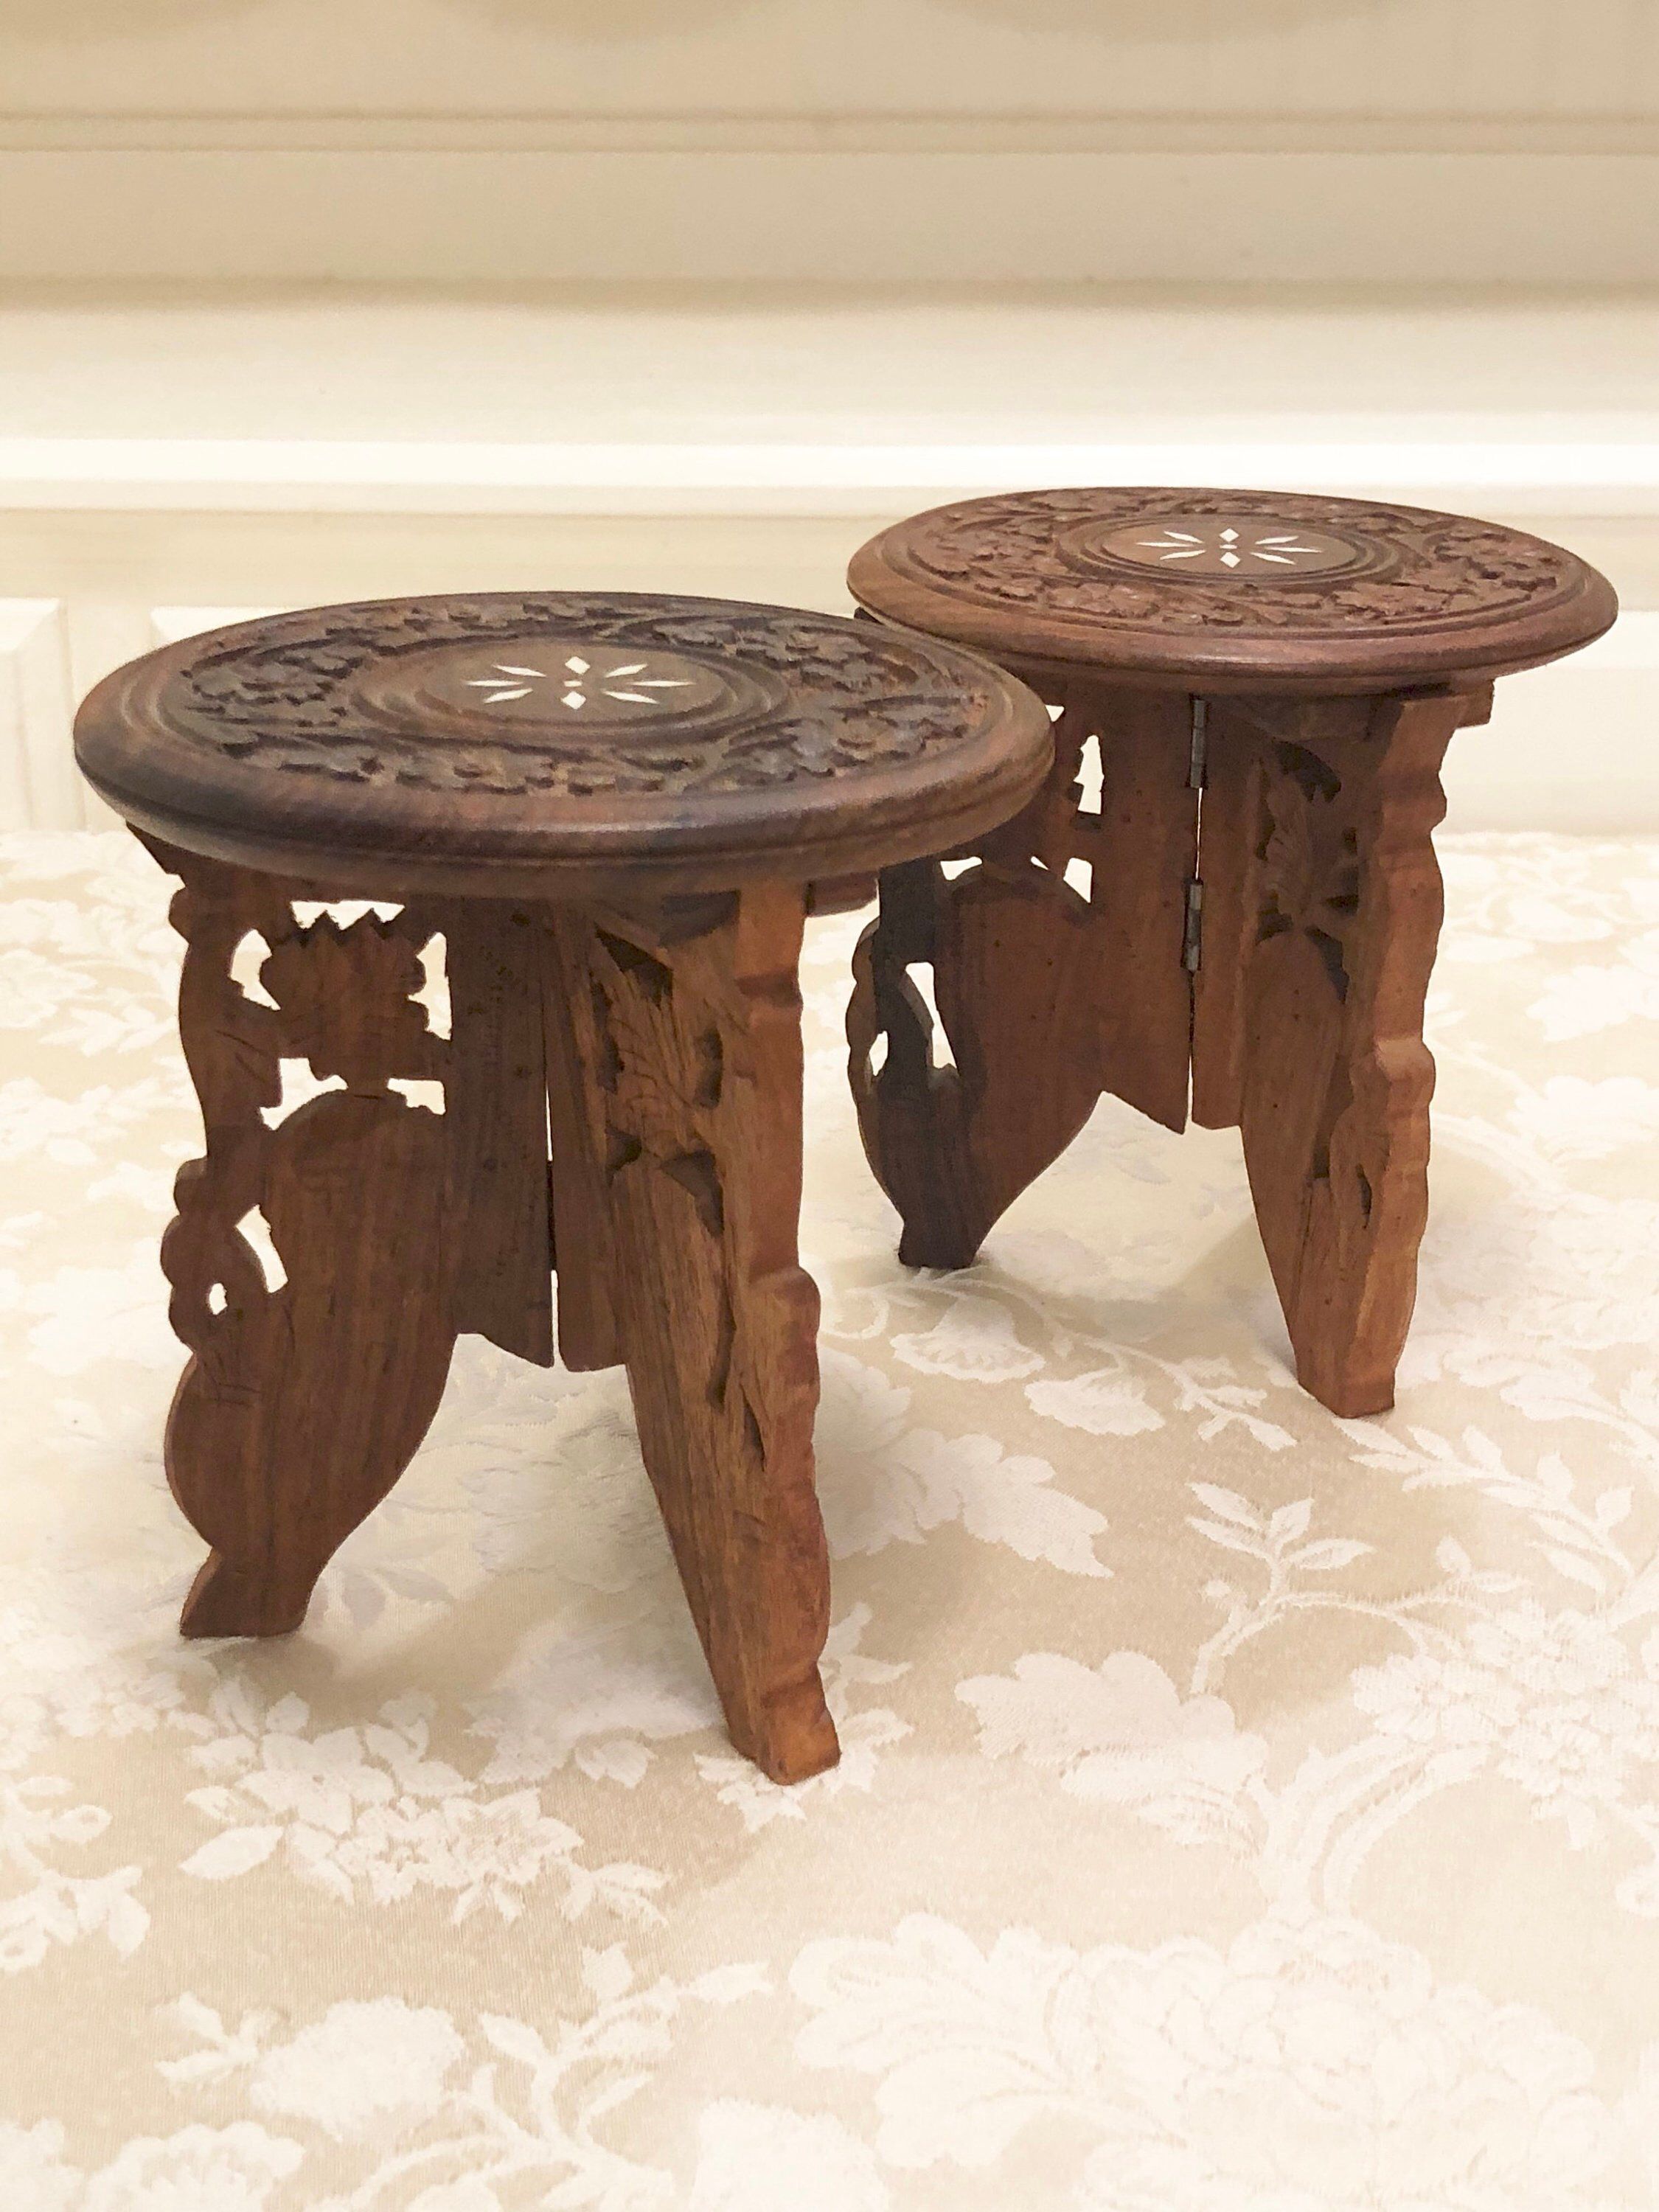 elegant carved wooden display candle holder small accent table shelf decor excited share this item from etsy yoga carpet floor divider large round metal coffee tall corner patio